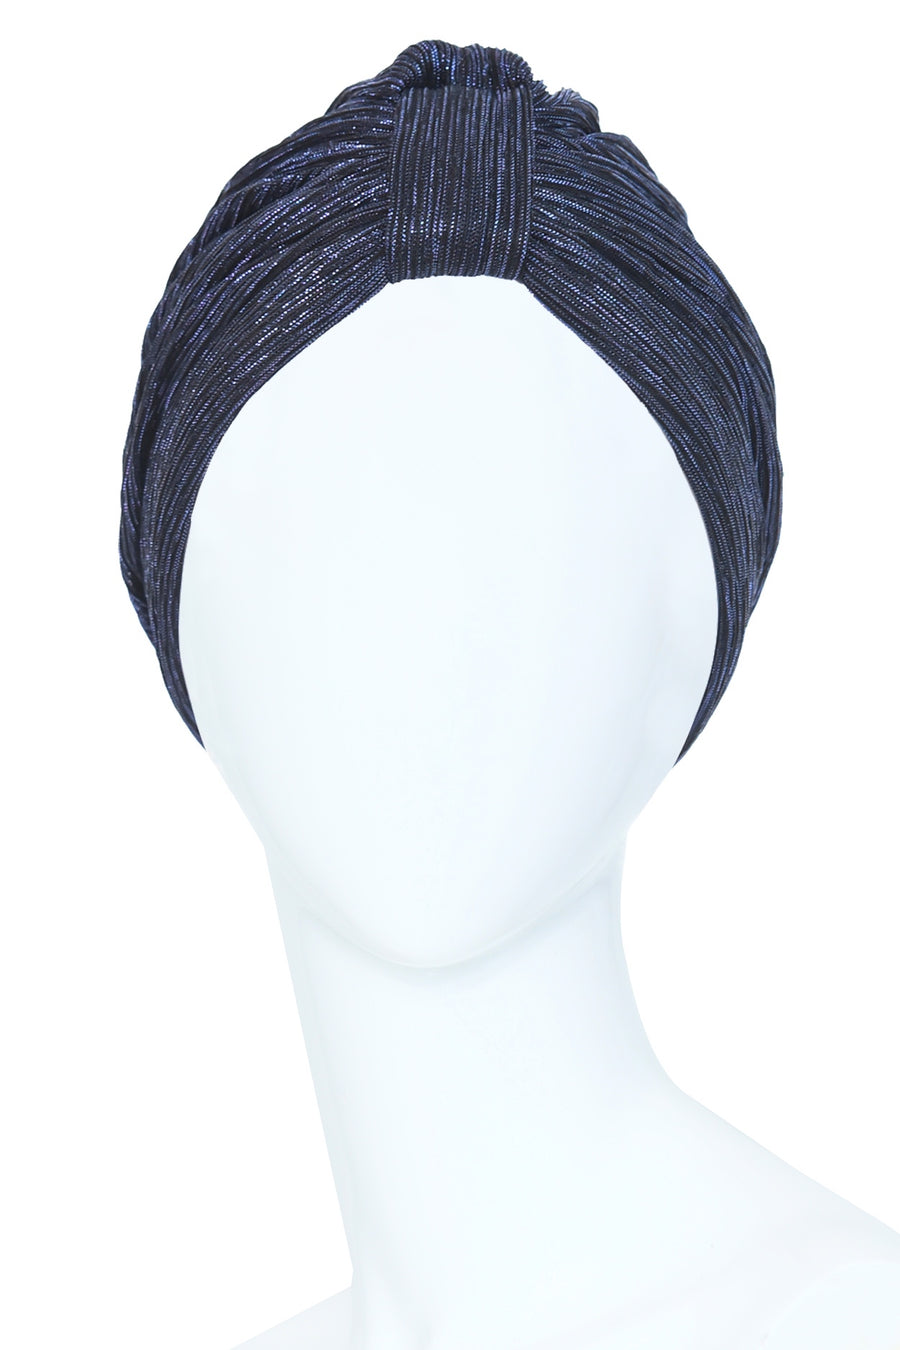 Black and blue sparkly turban - NEW !